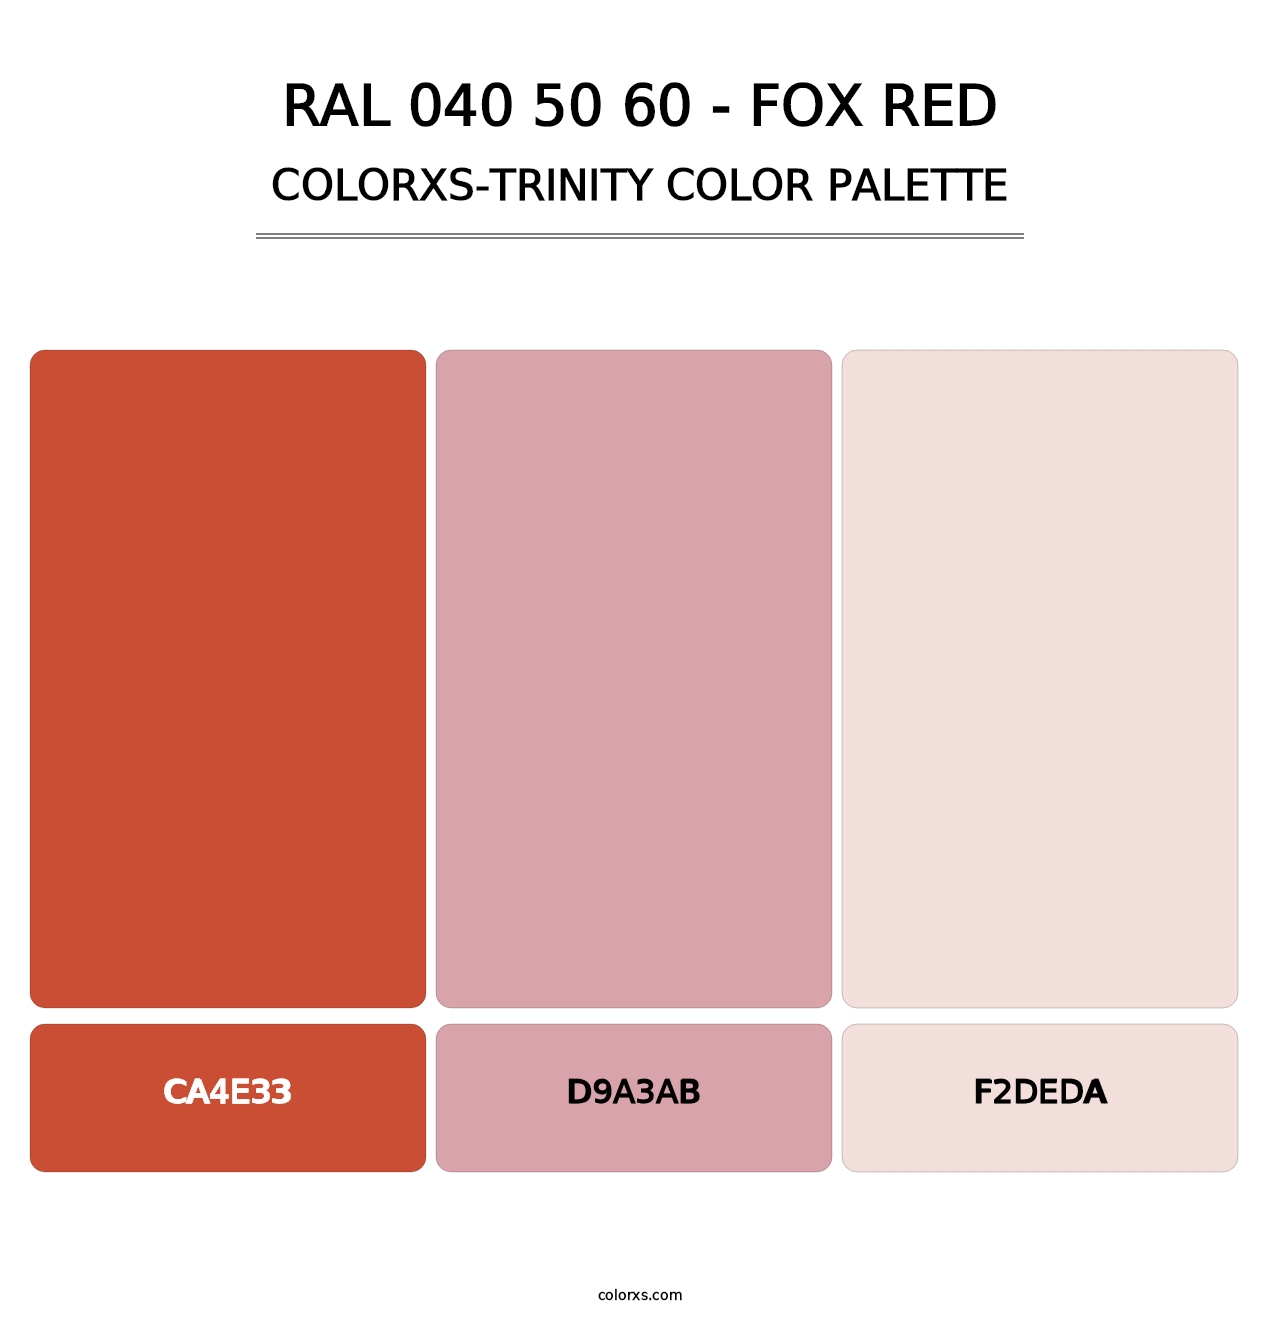 RAL 040 50 60 - Fox Red - Colorxs Trinity Palette